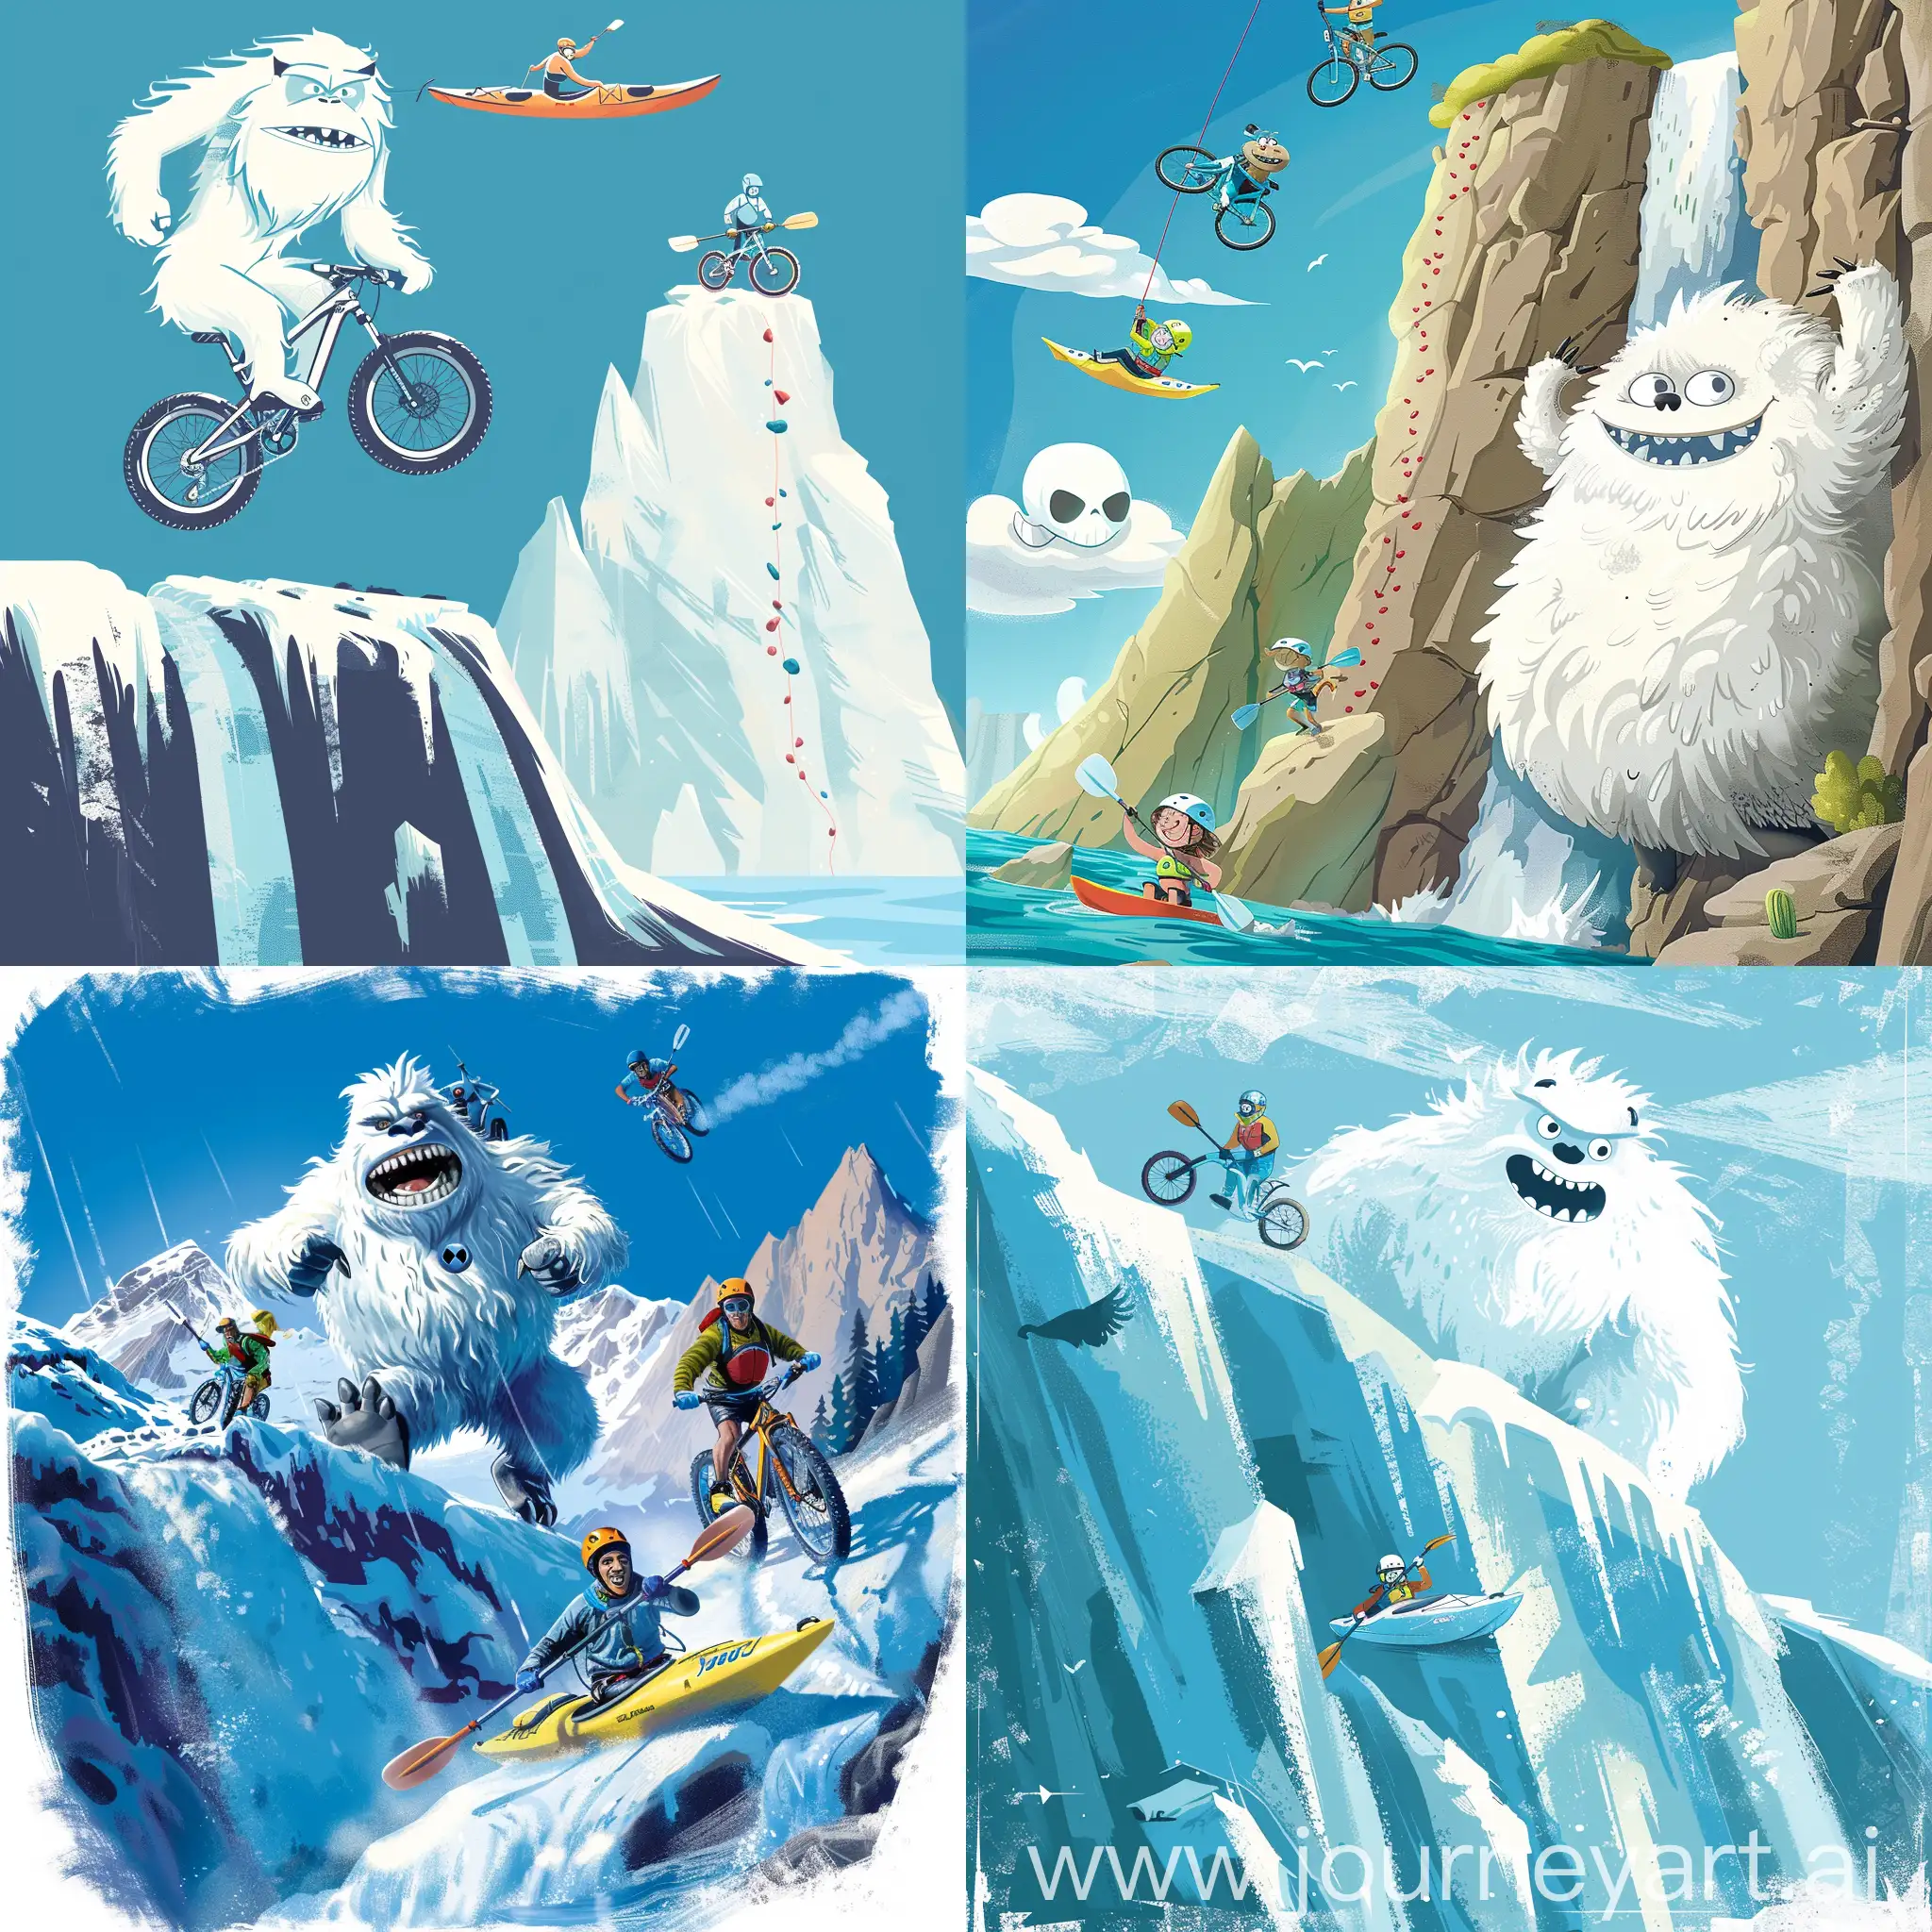 Outdoor-Adventure-Sports-Competition-Yeti-and-Humans-Race-in-Running-Biking-Kayaking-and-Climbing